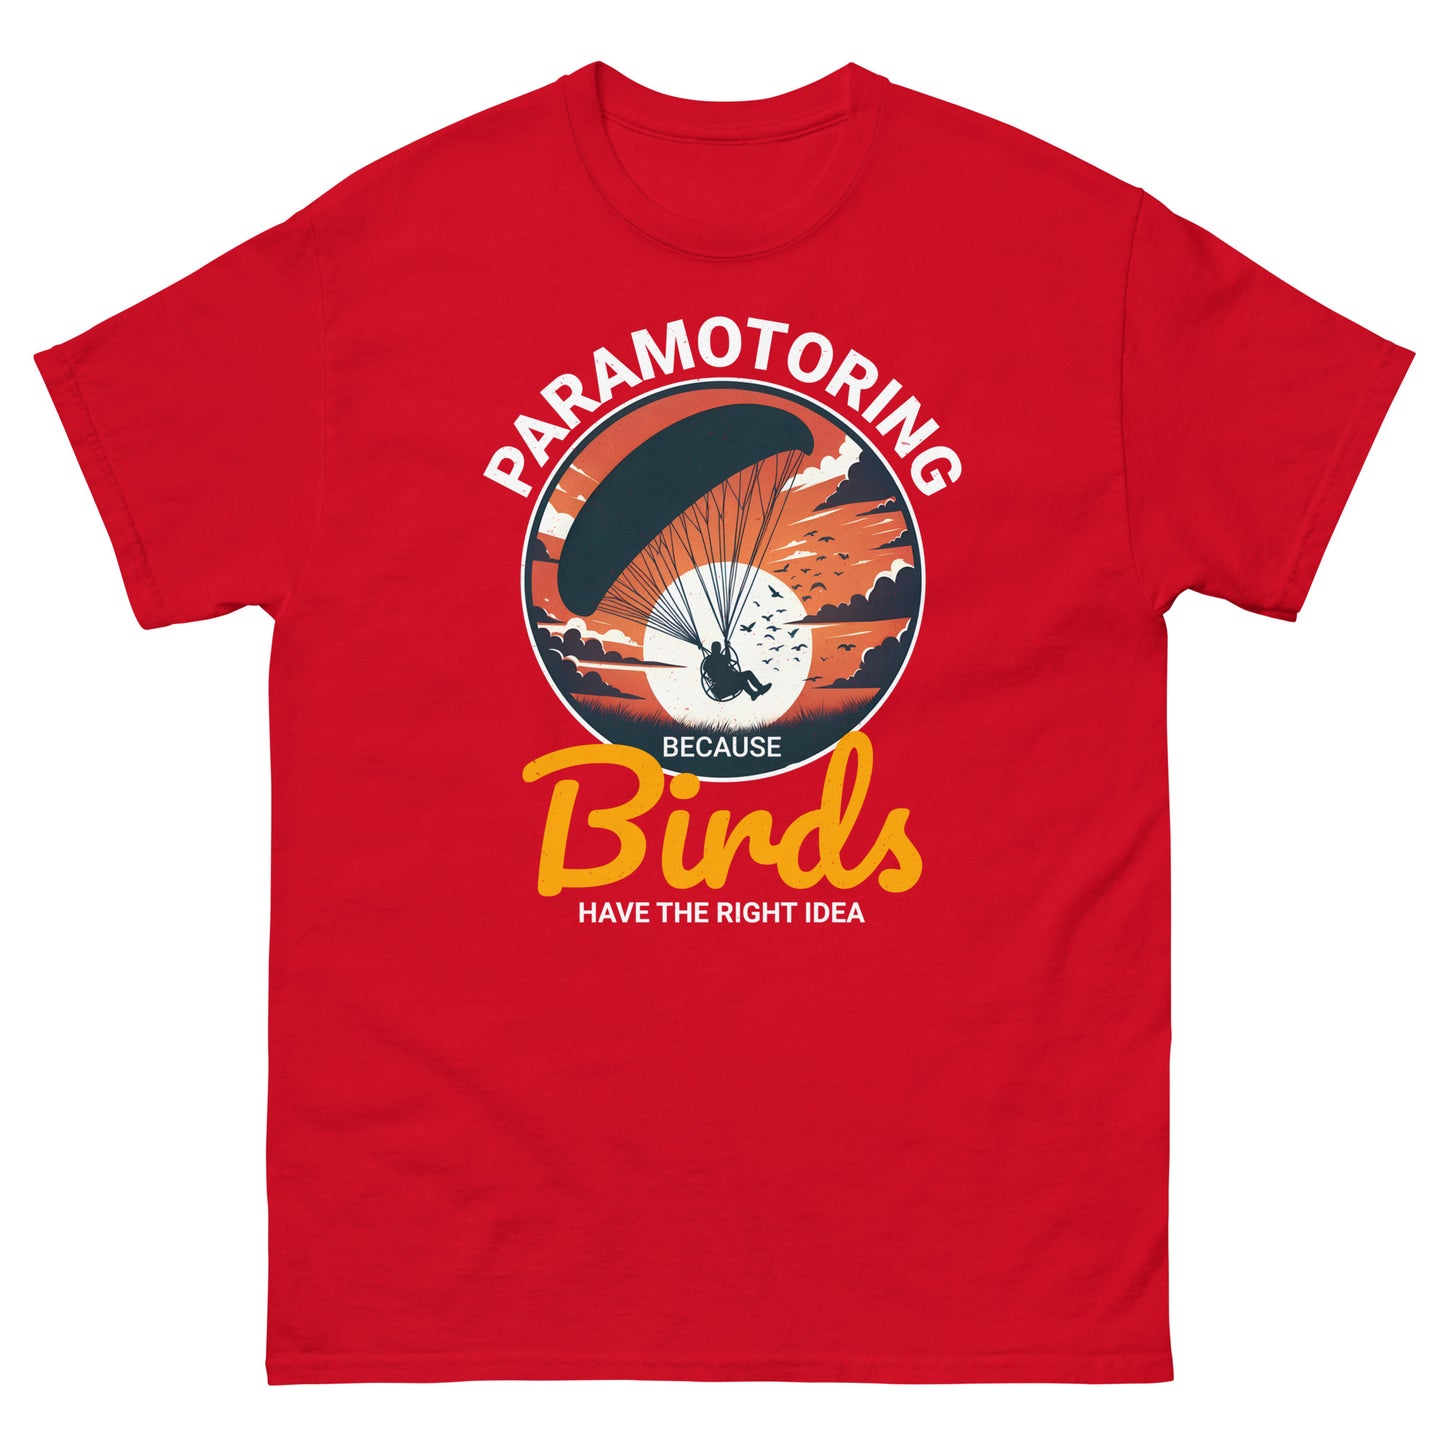 Paramotoring T-Shirt: Because Birds Have the Right Idea